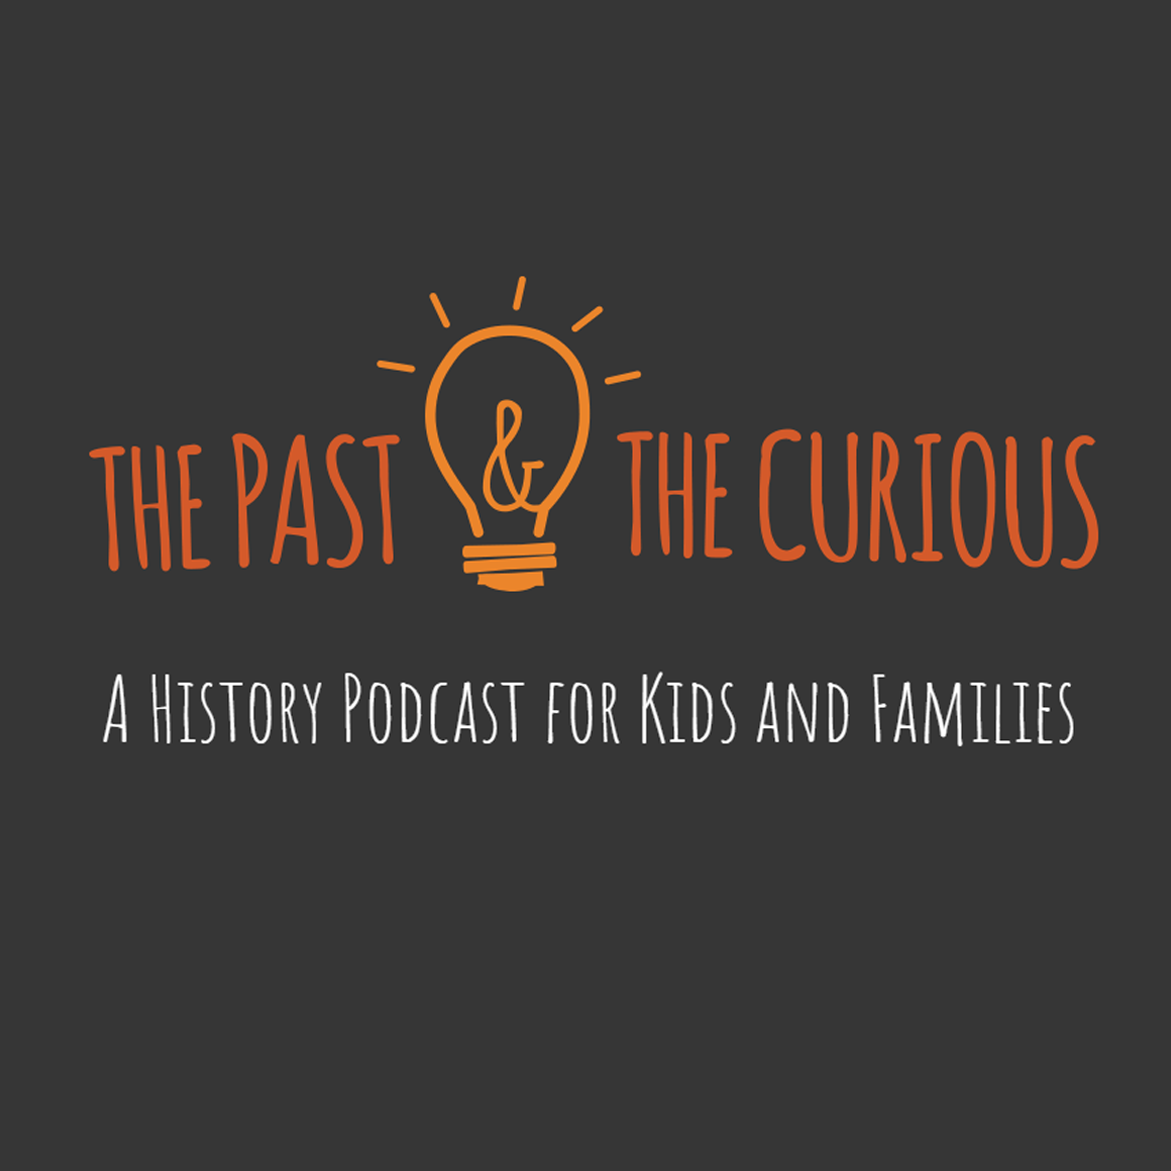 Past and curious podcast logo